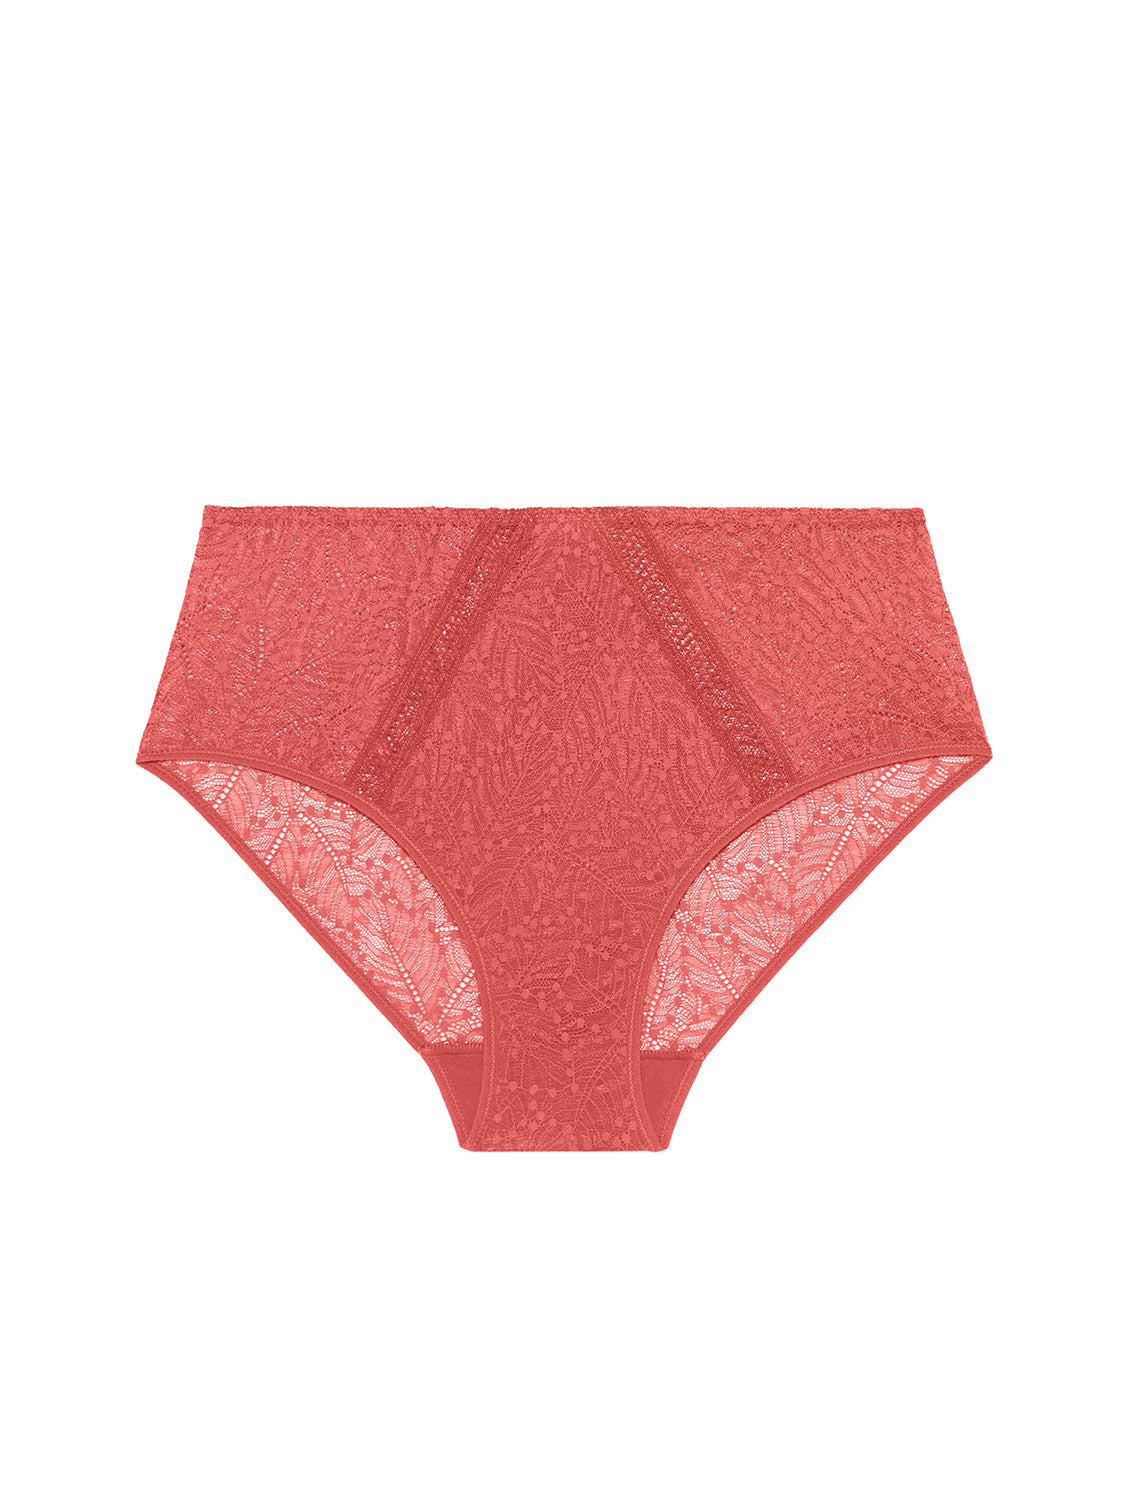 Comete Tanga Panty Sweet Chestnut 12S710 - Lace & Day